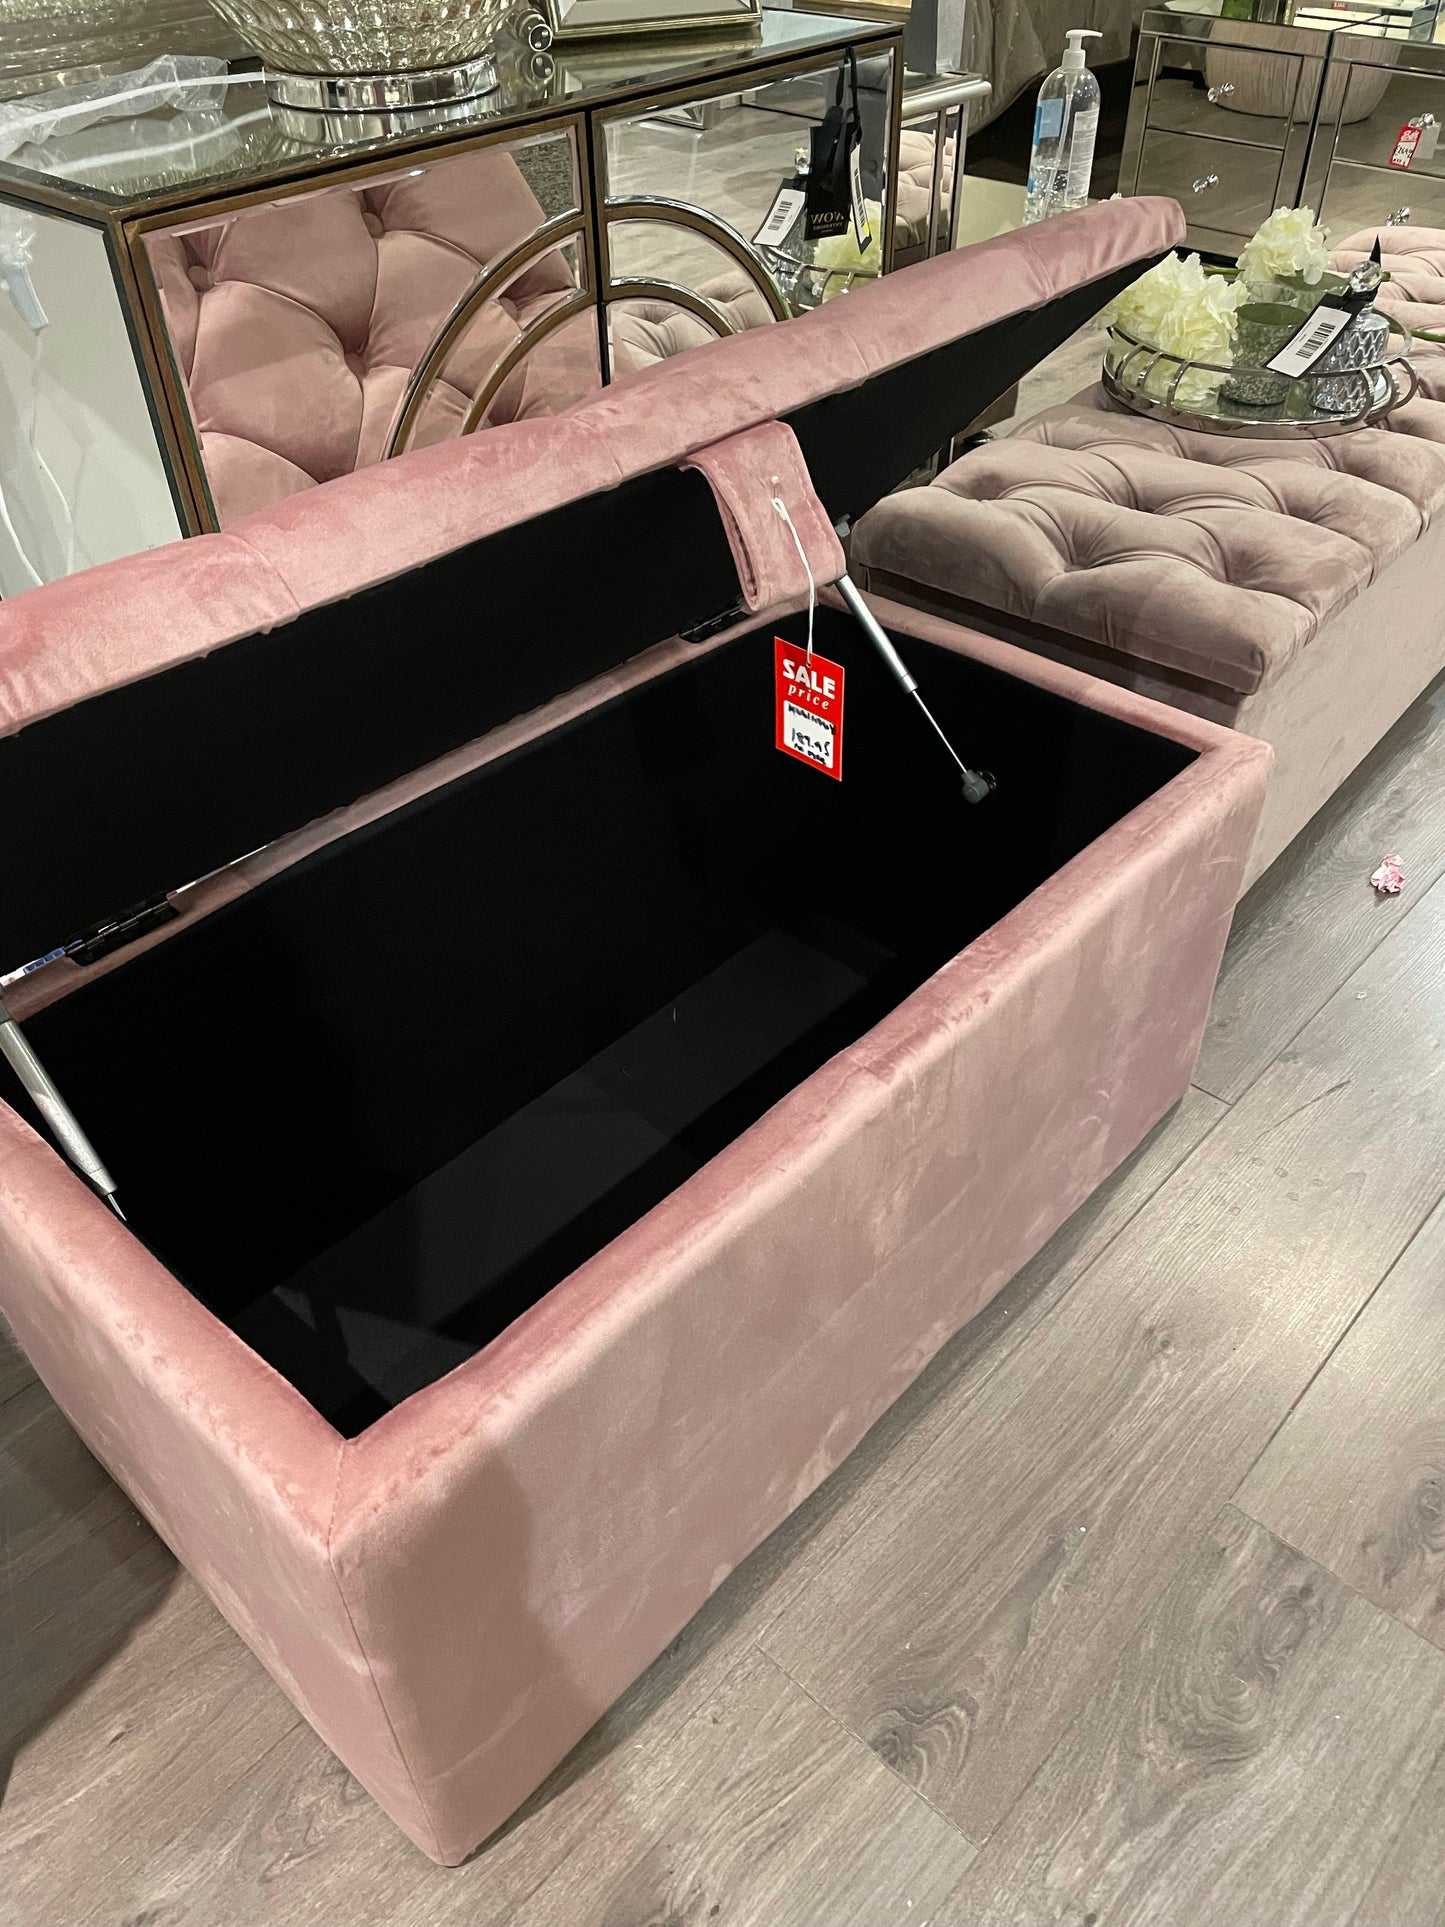 Molineux Velvet pink  ottoman with storage 673 warehouse clearance  click n collect